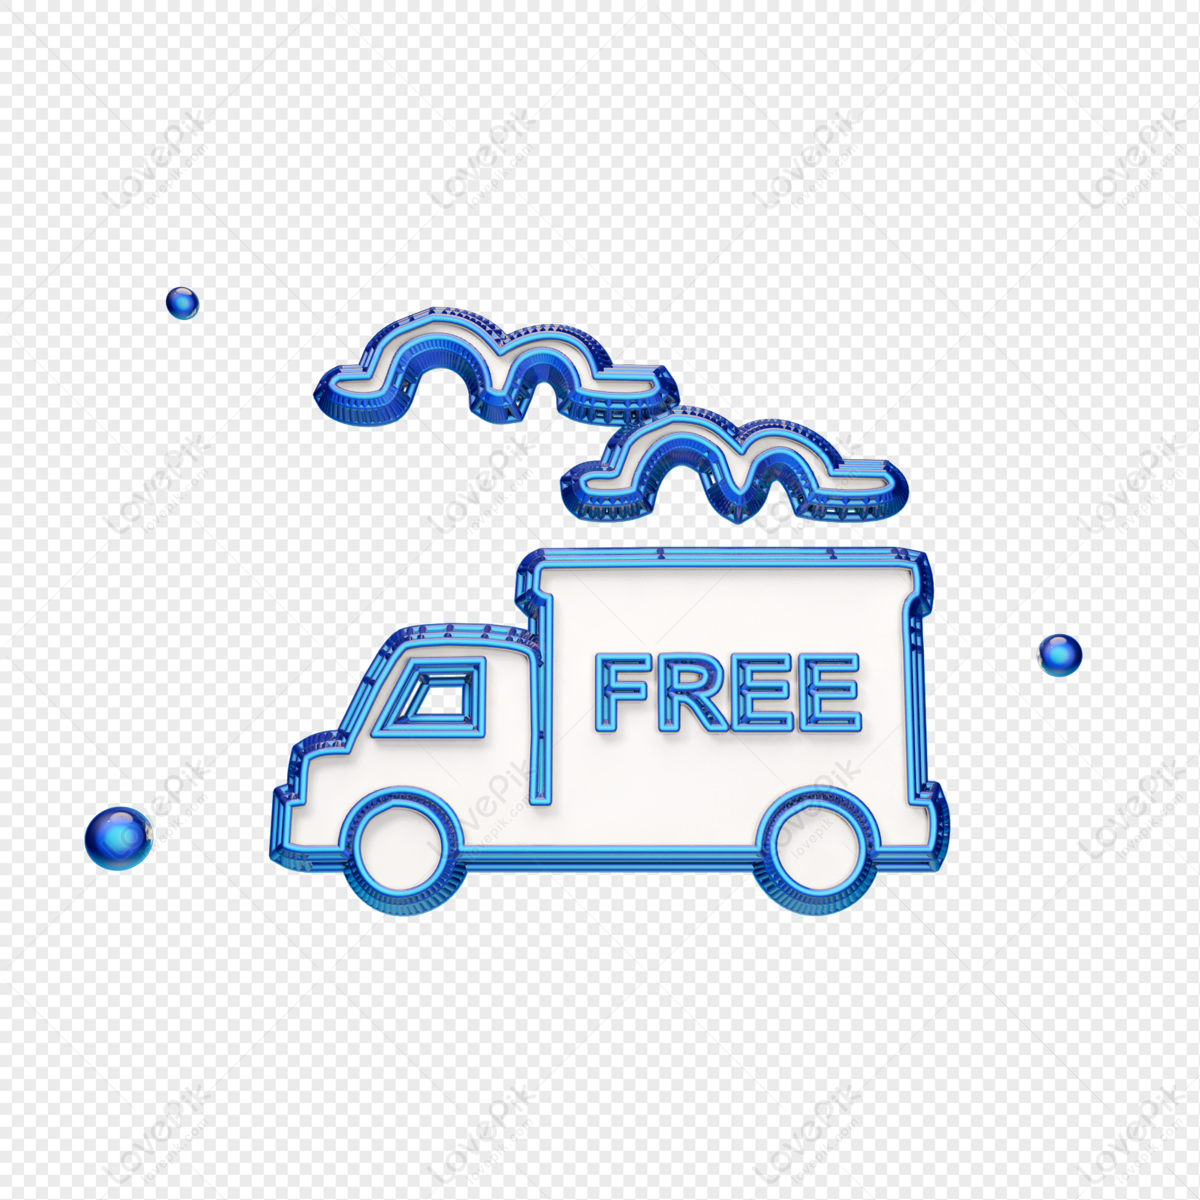 Free delivery color icon #AD , #paid, #paid, #delivery, #color, #icon, #Free  | Logo online shop, Logo design creative, Packaging design inspiration